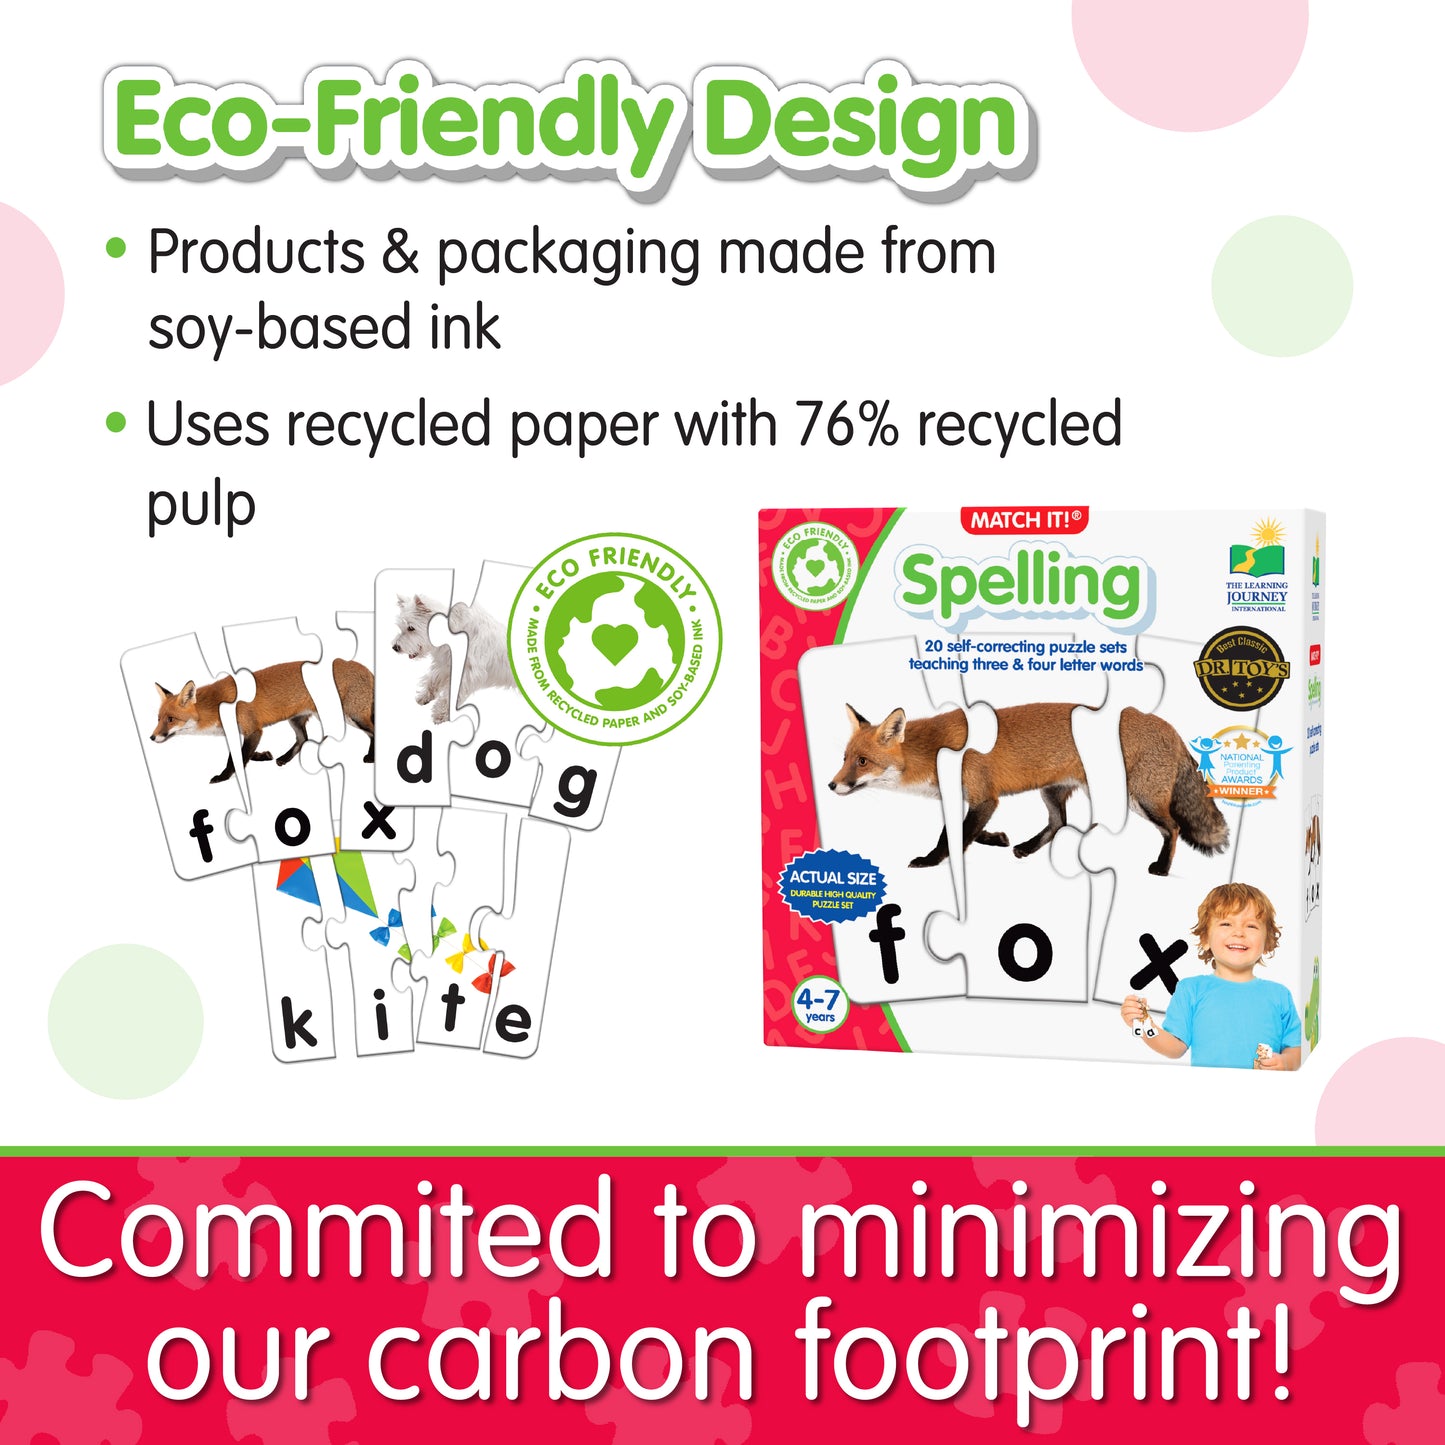 Infographic about Match It - Spelling's eco-friendly design that says, "Committed to minimizing our carbon footprint!"